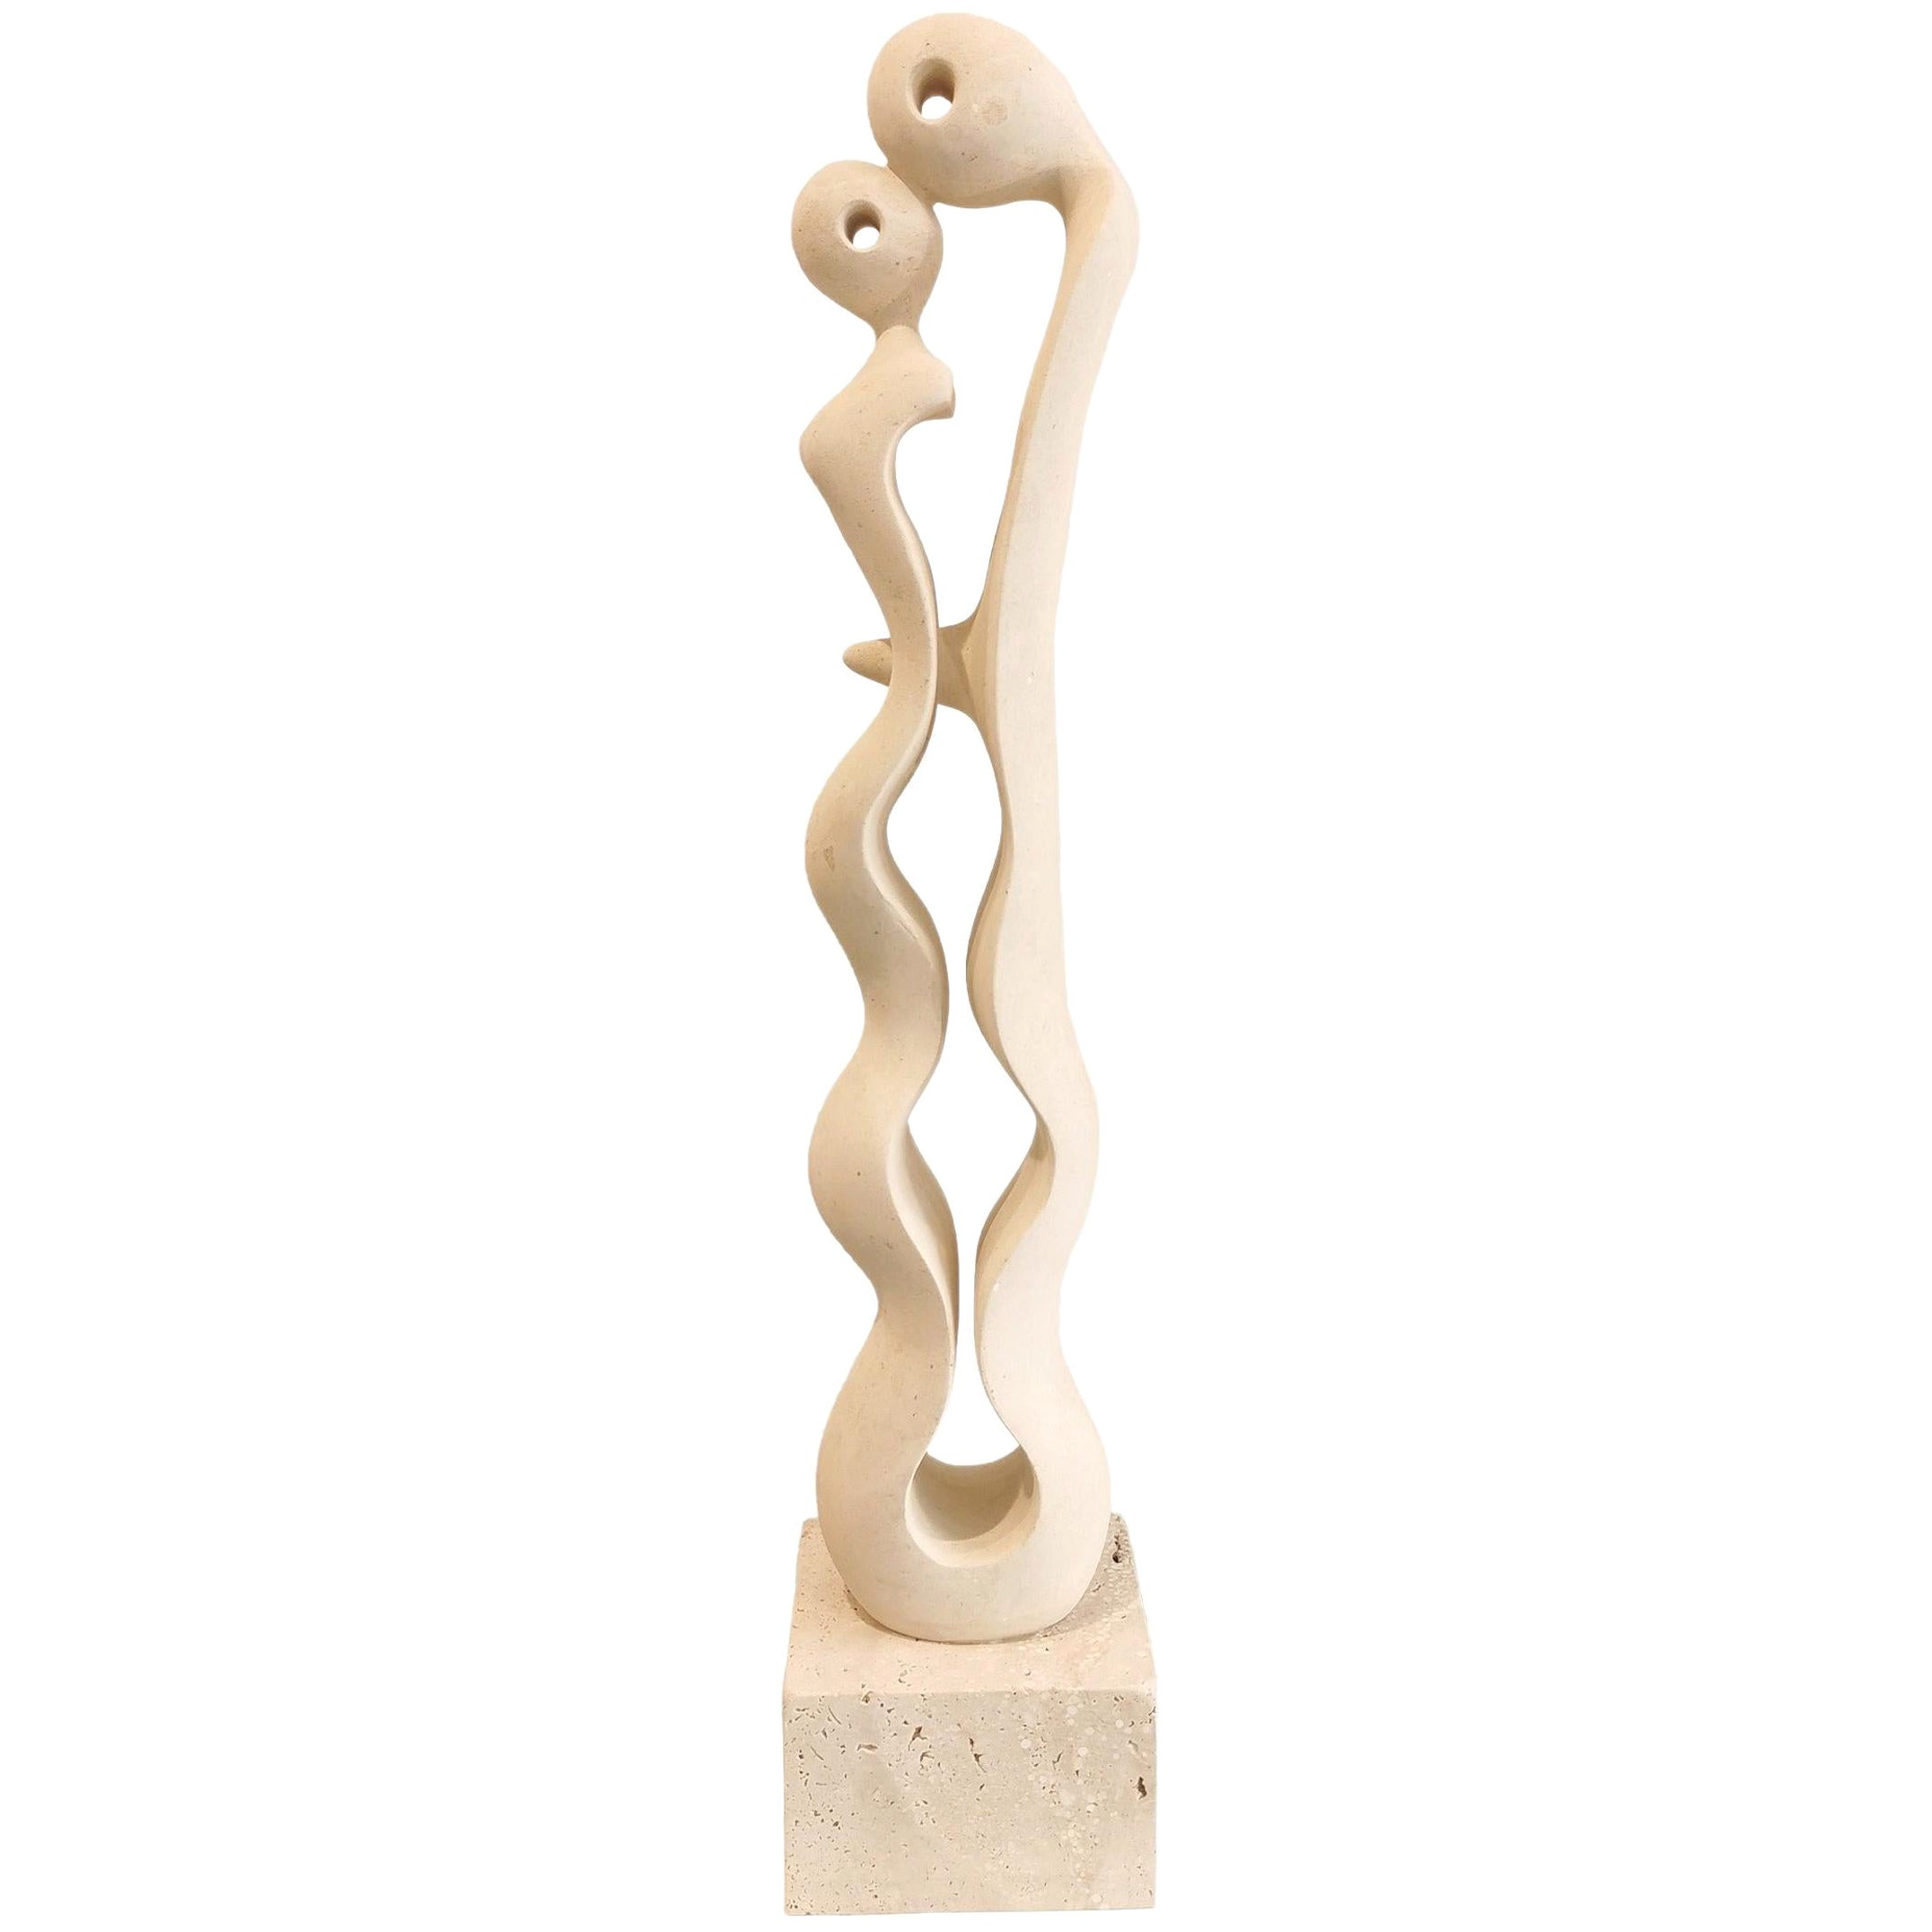 21st Century Abstract Sculpture ALTERIUS 60 cm height by Renzo Buttazzo For Sale